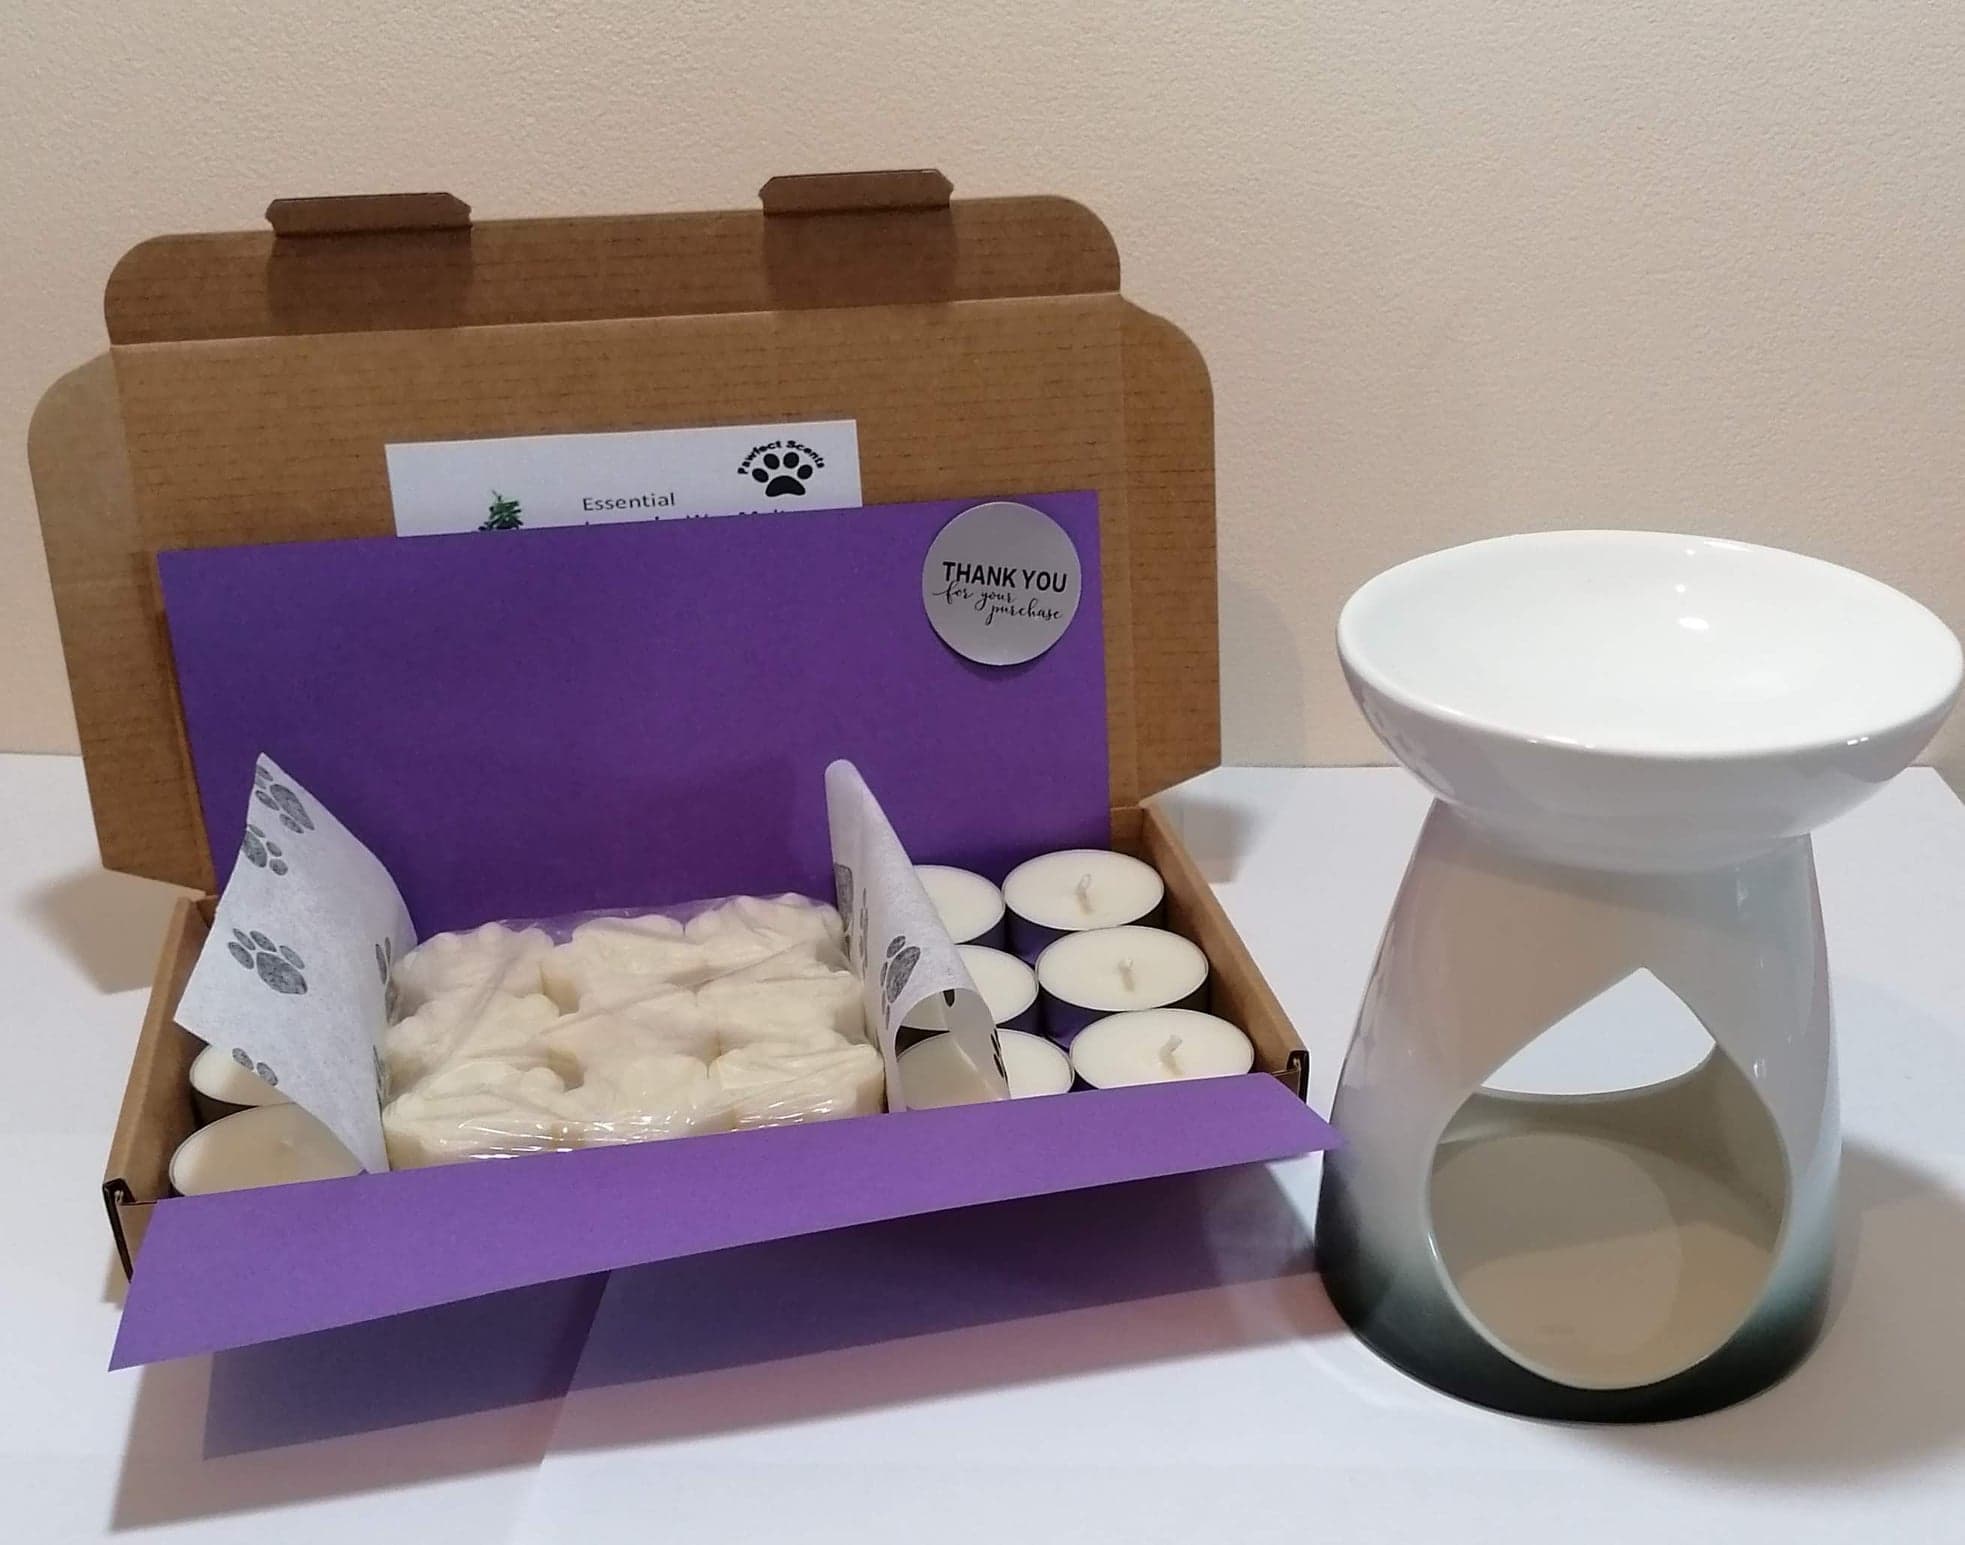 Pet Friendly Wax Melts – Paws Right There